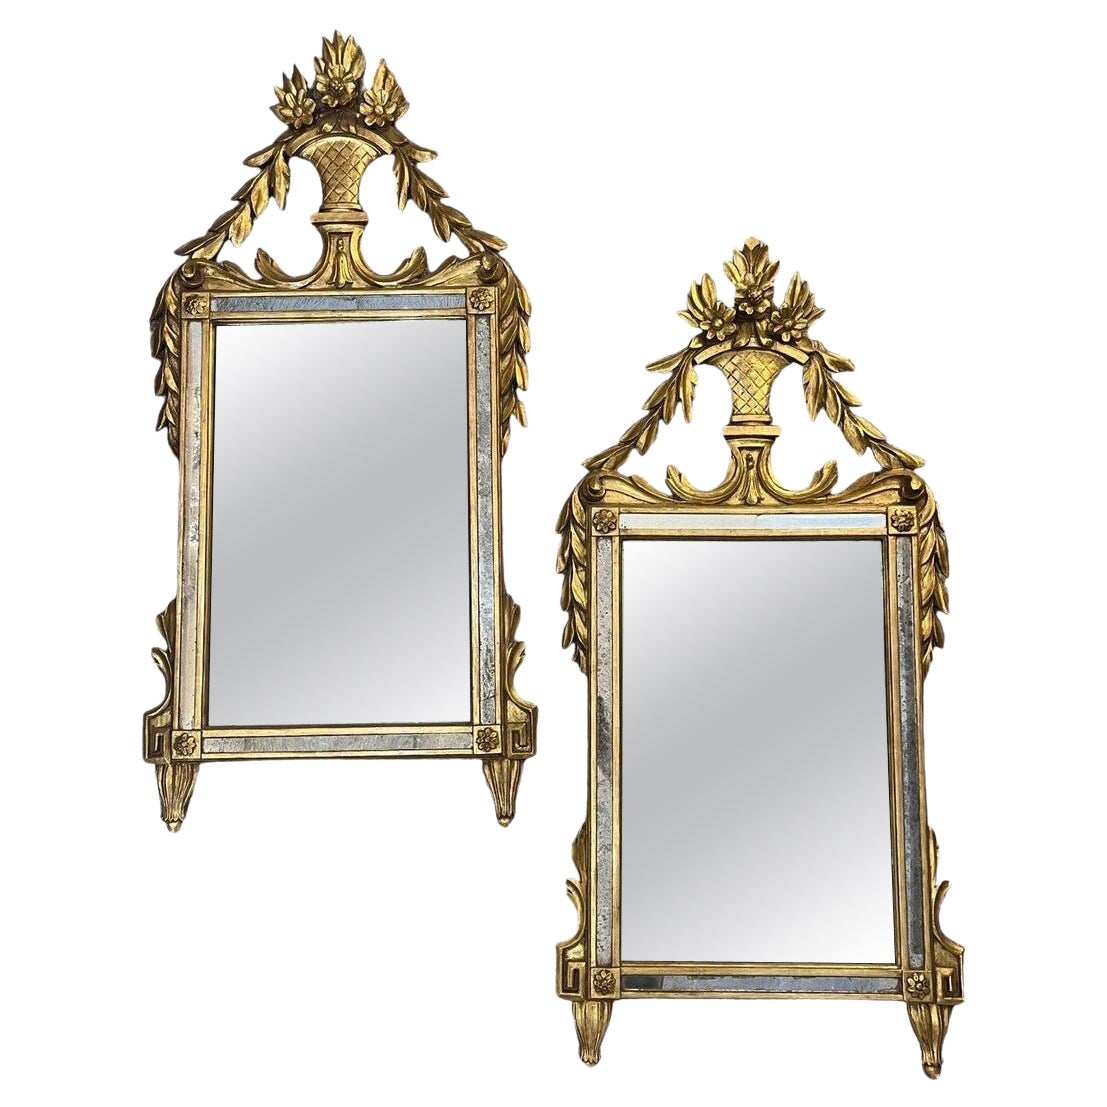 Pair of 19th Century Antique Italian Florentine Carved Gilt Mirrors For Sale